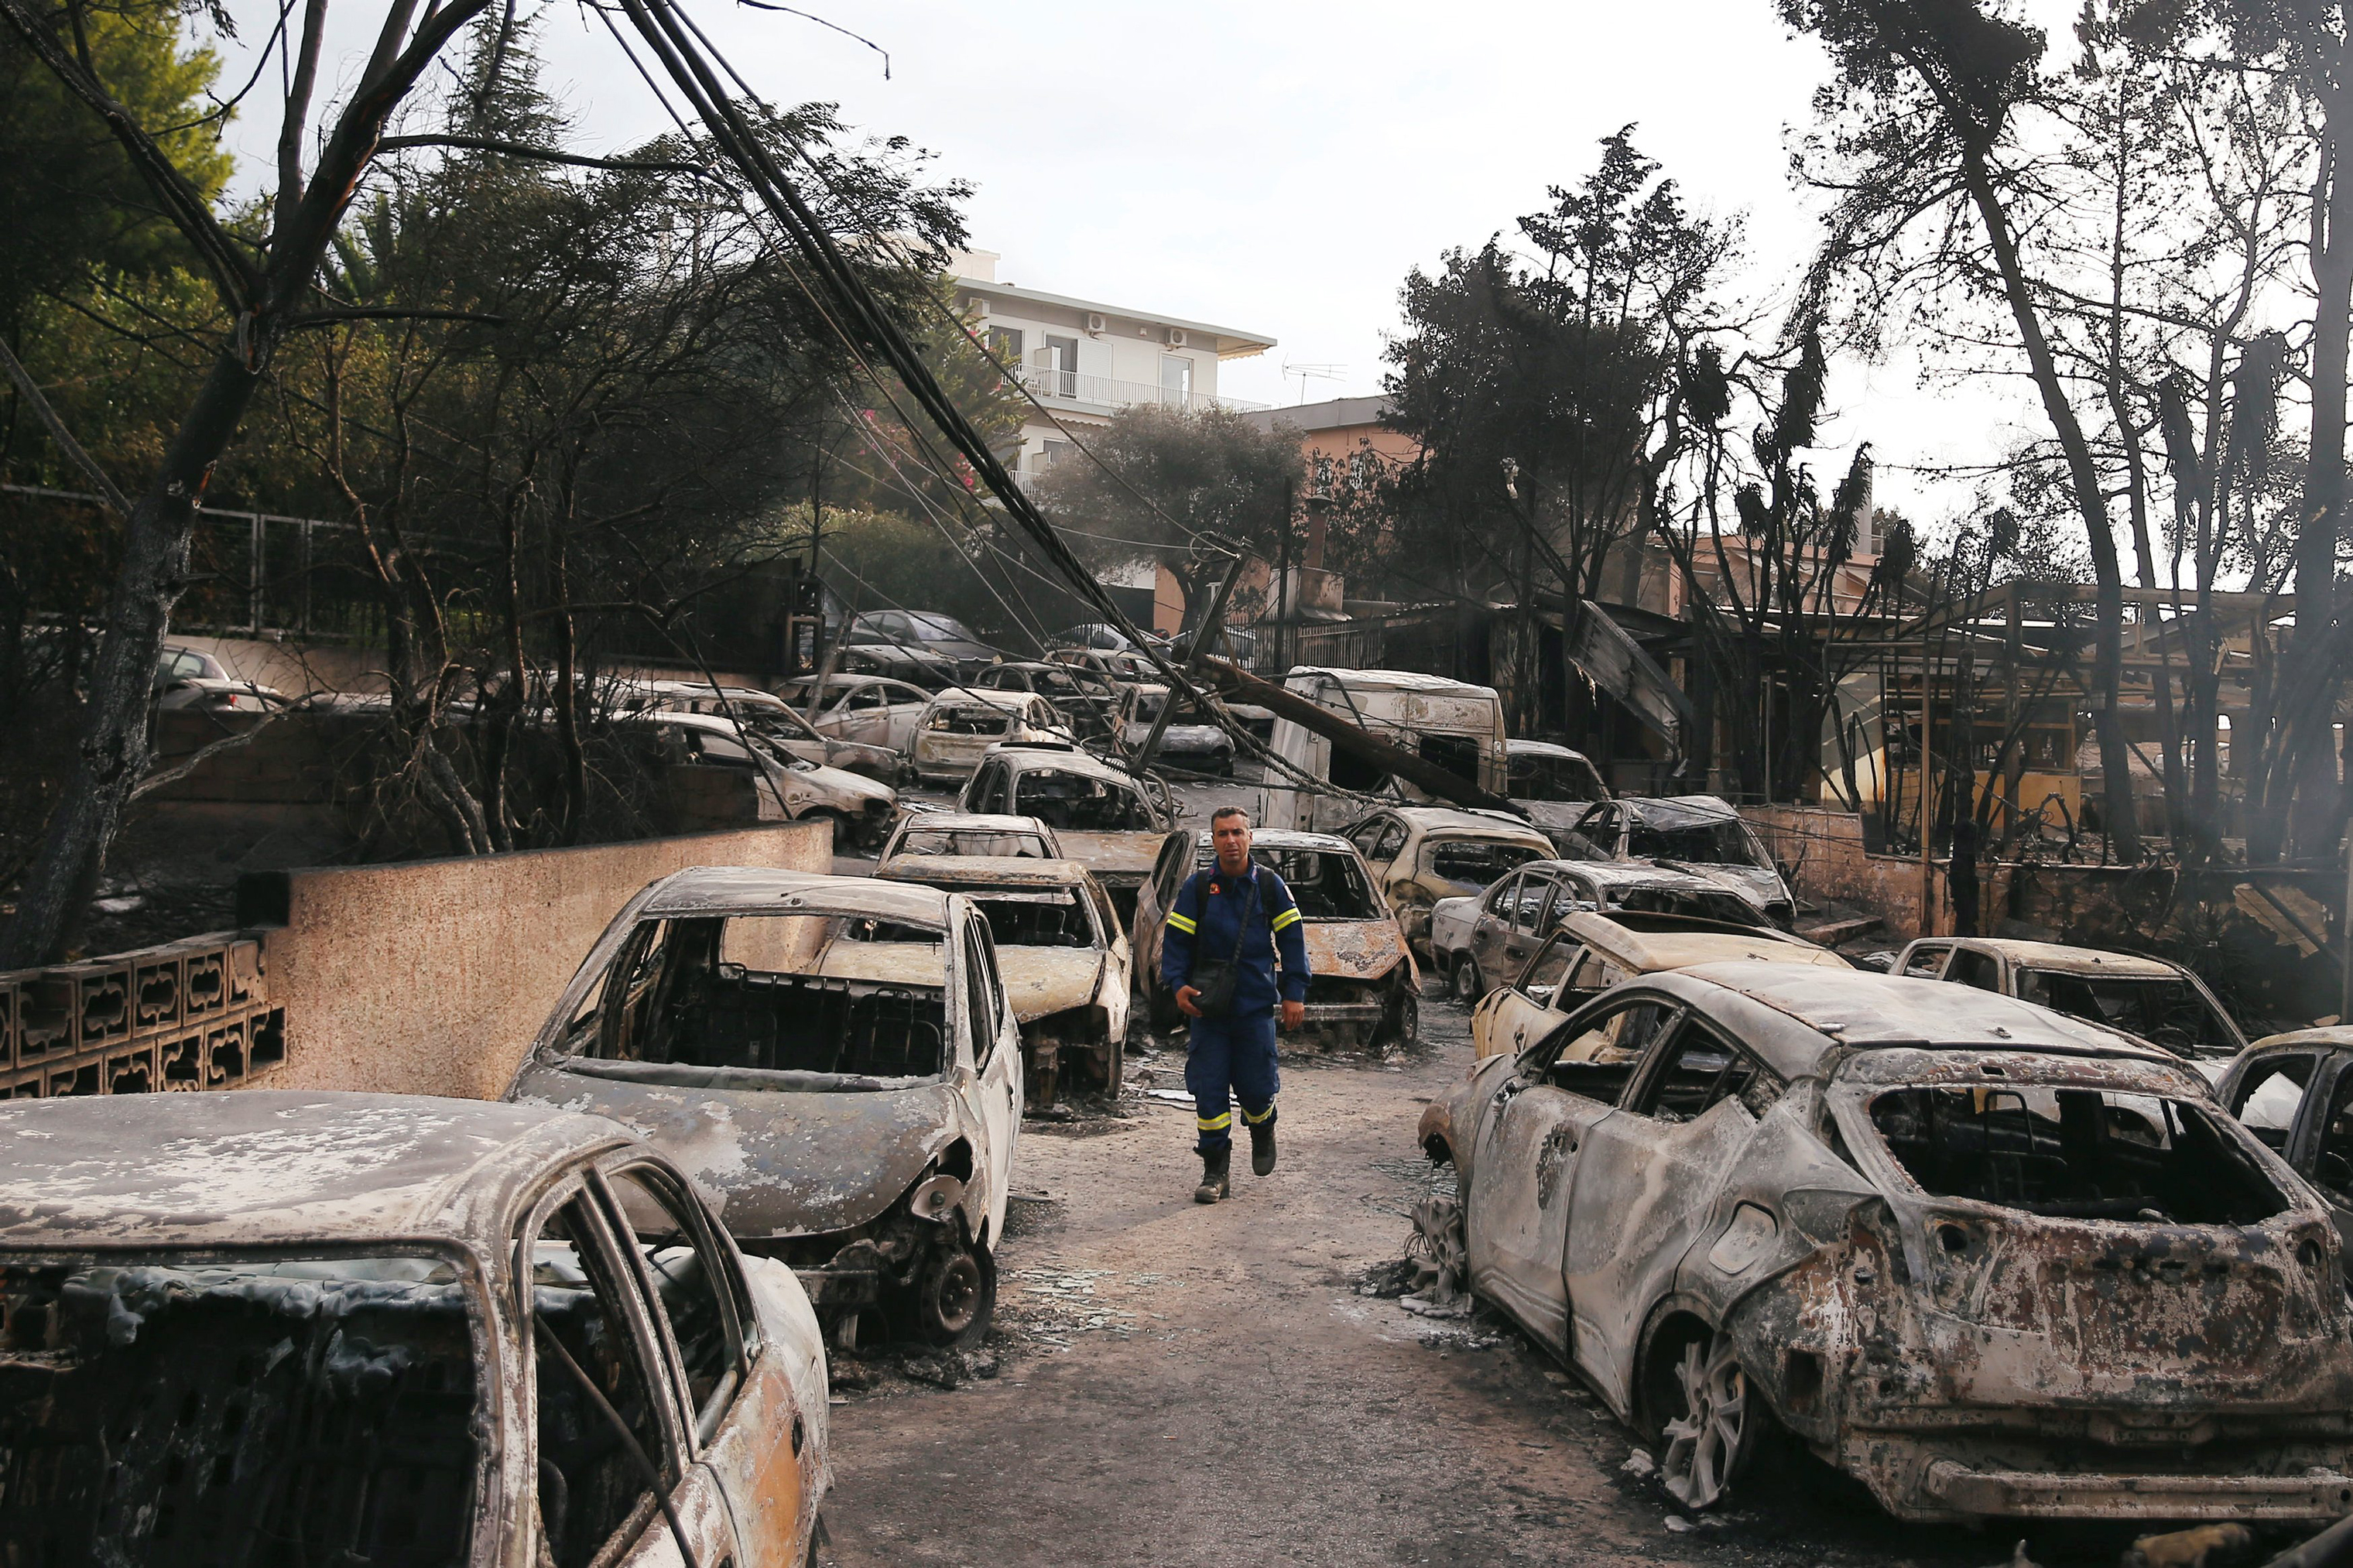 A firefighter walks among burned cars, following a wildfire at the village of Mati, near Athens on July 24, 2018. (Costas Baltas—Reuters)